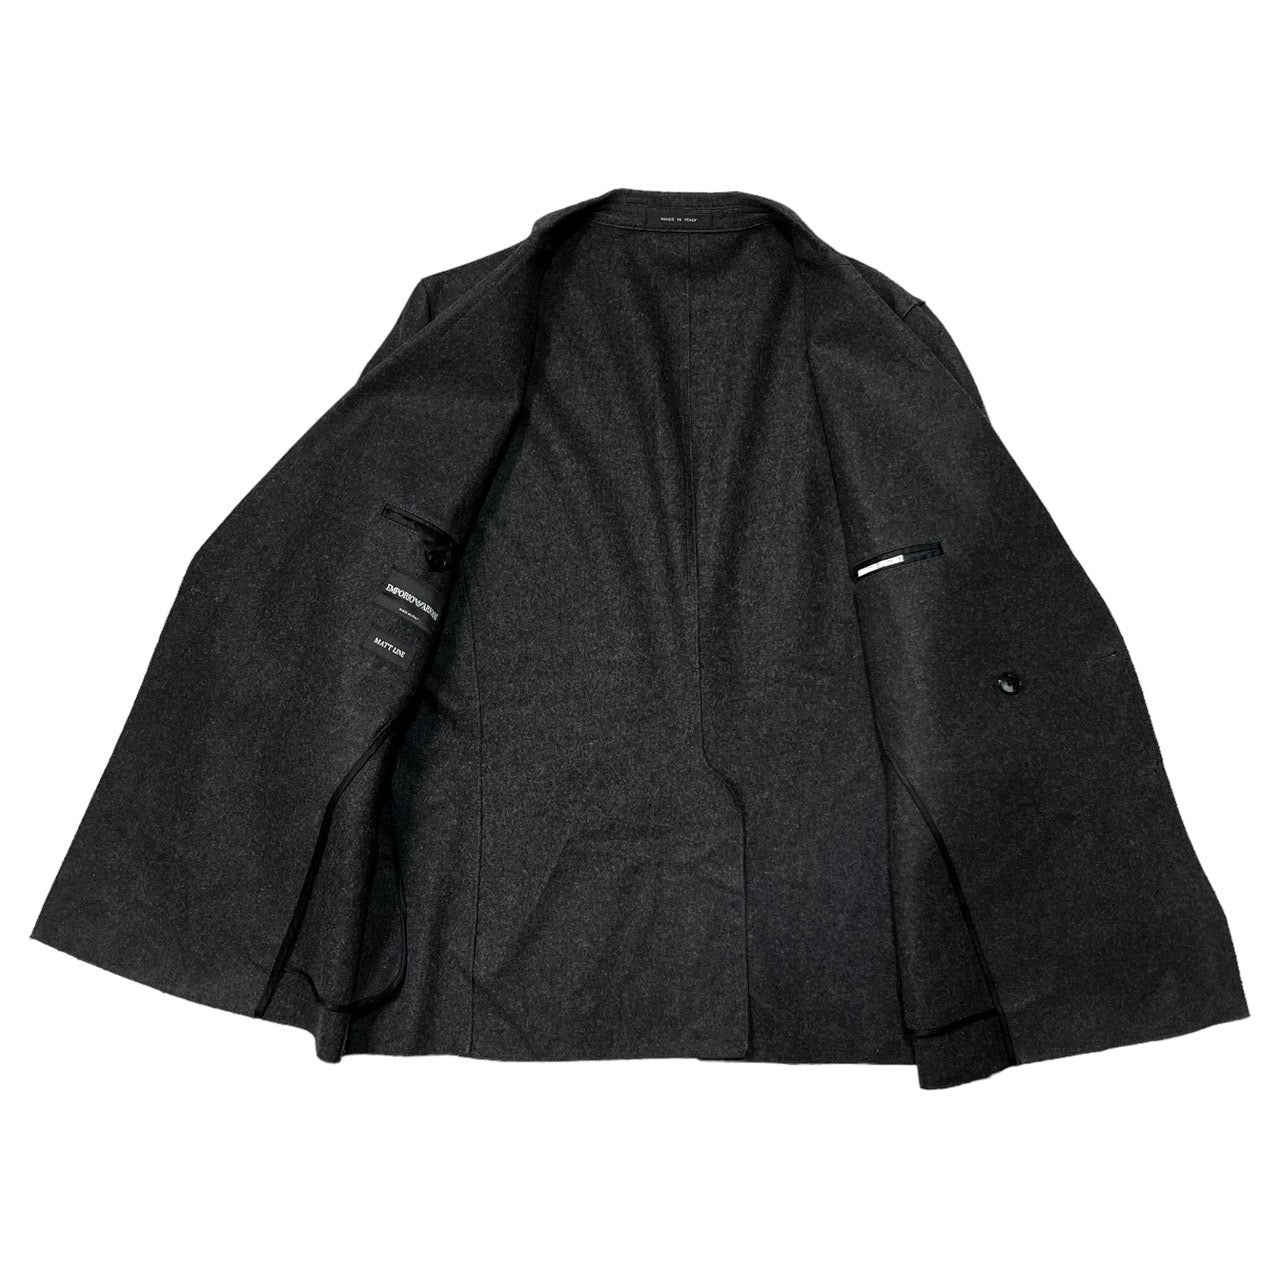 EMPORIO ARMANI(エンポリオアルマーニ) wool double-breasted jacket